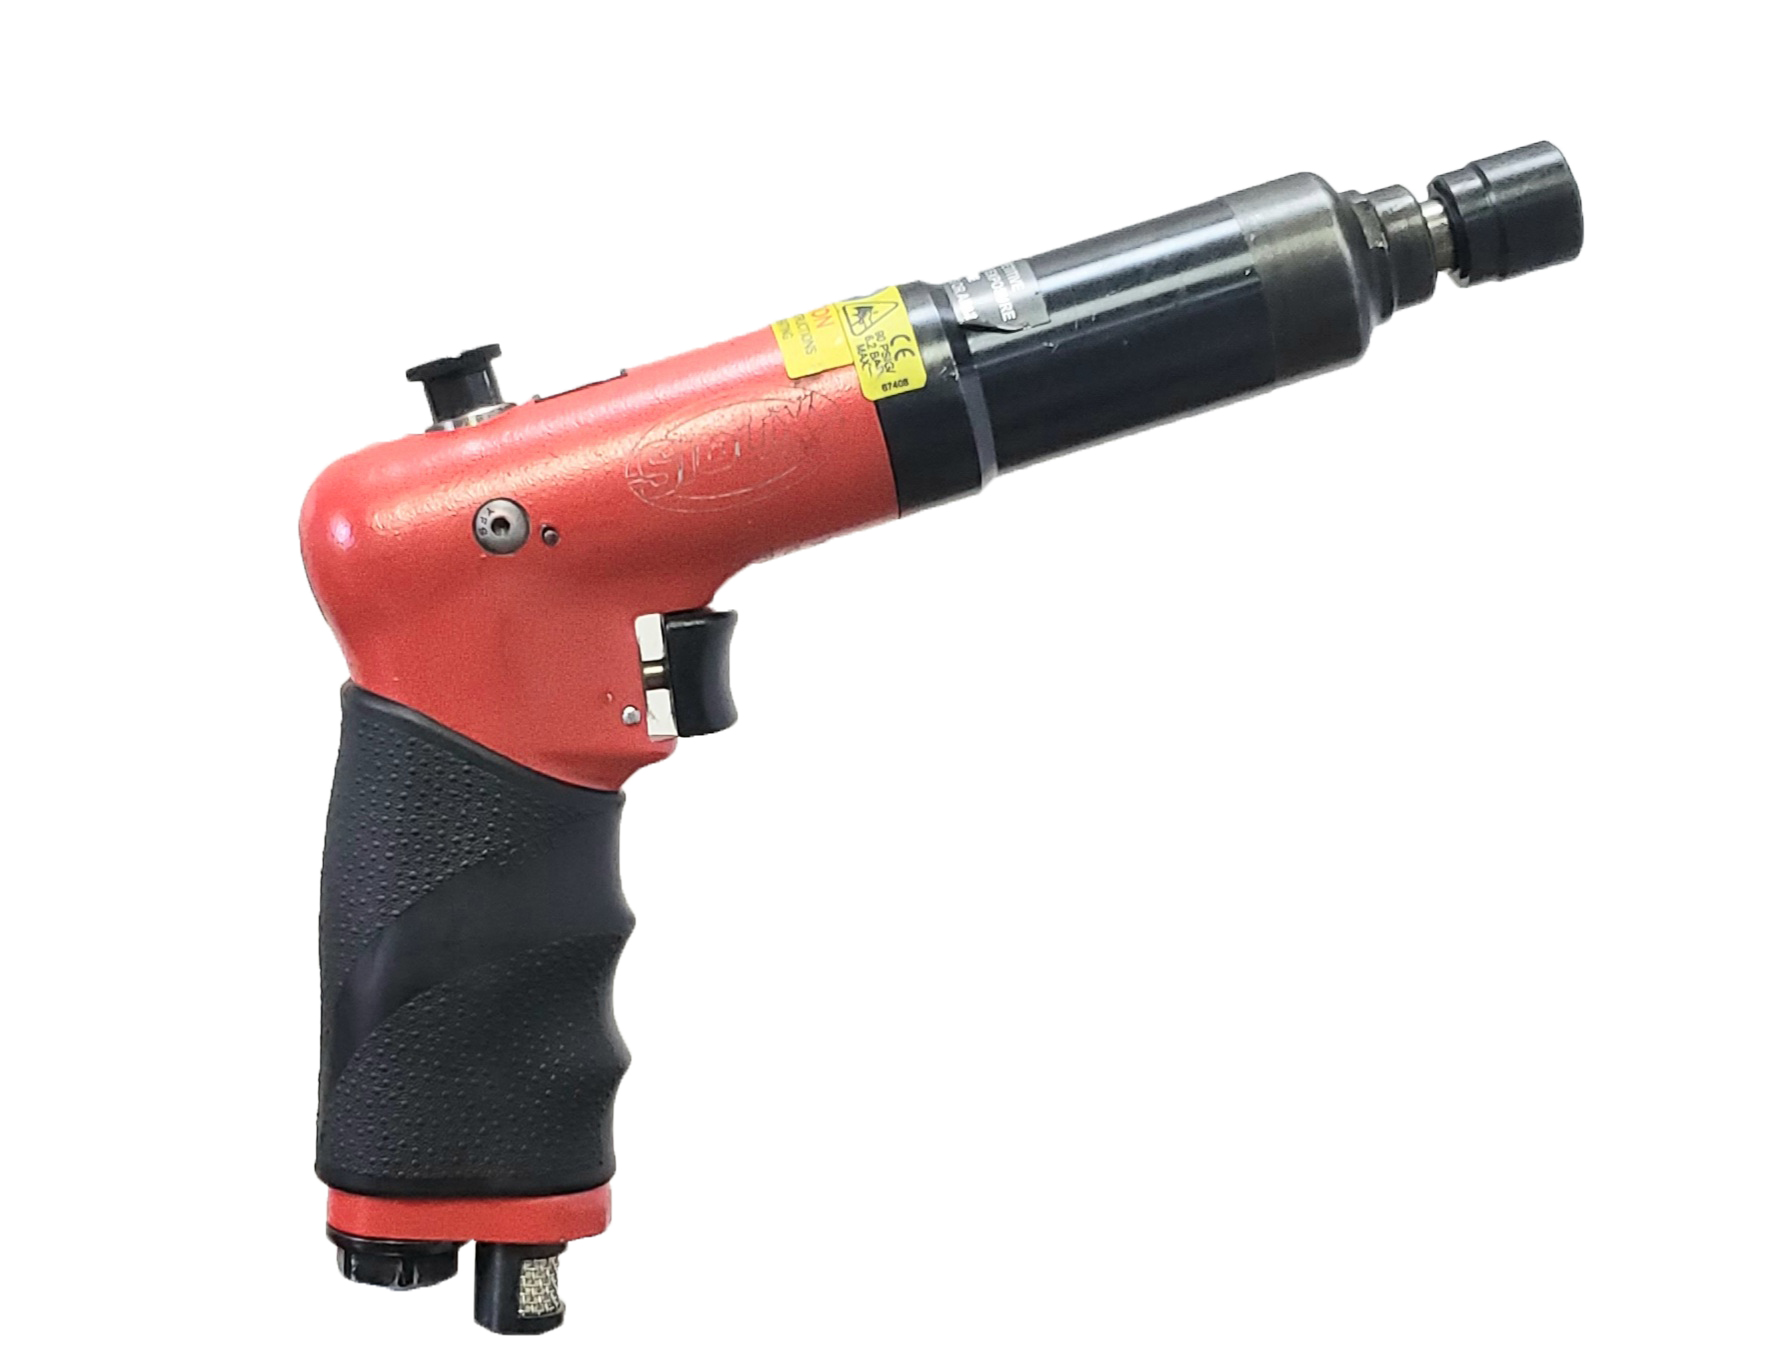 1OM2103 SIOUX PISTOL GRIP SCREWDRIVER POSITIVE CLUTCH 55 IN.LBS 725 RPM QUICK CHANGE ( RECONDITIONED)